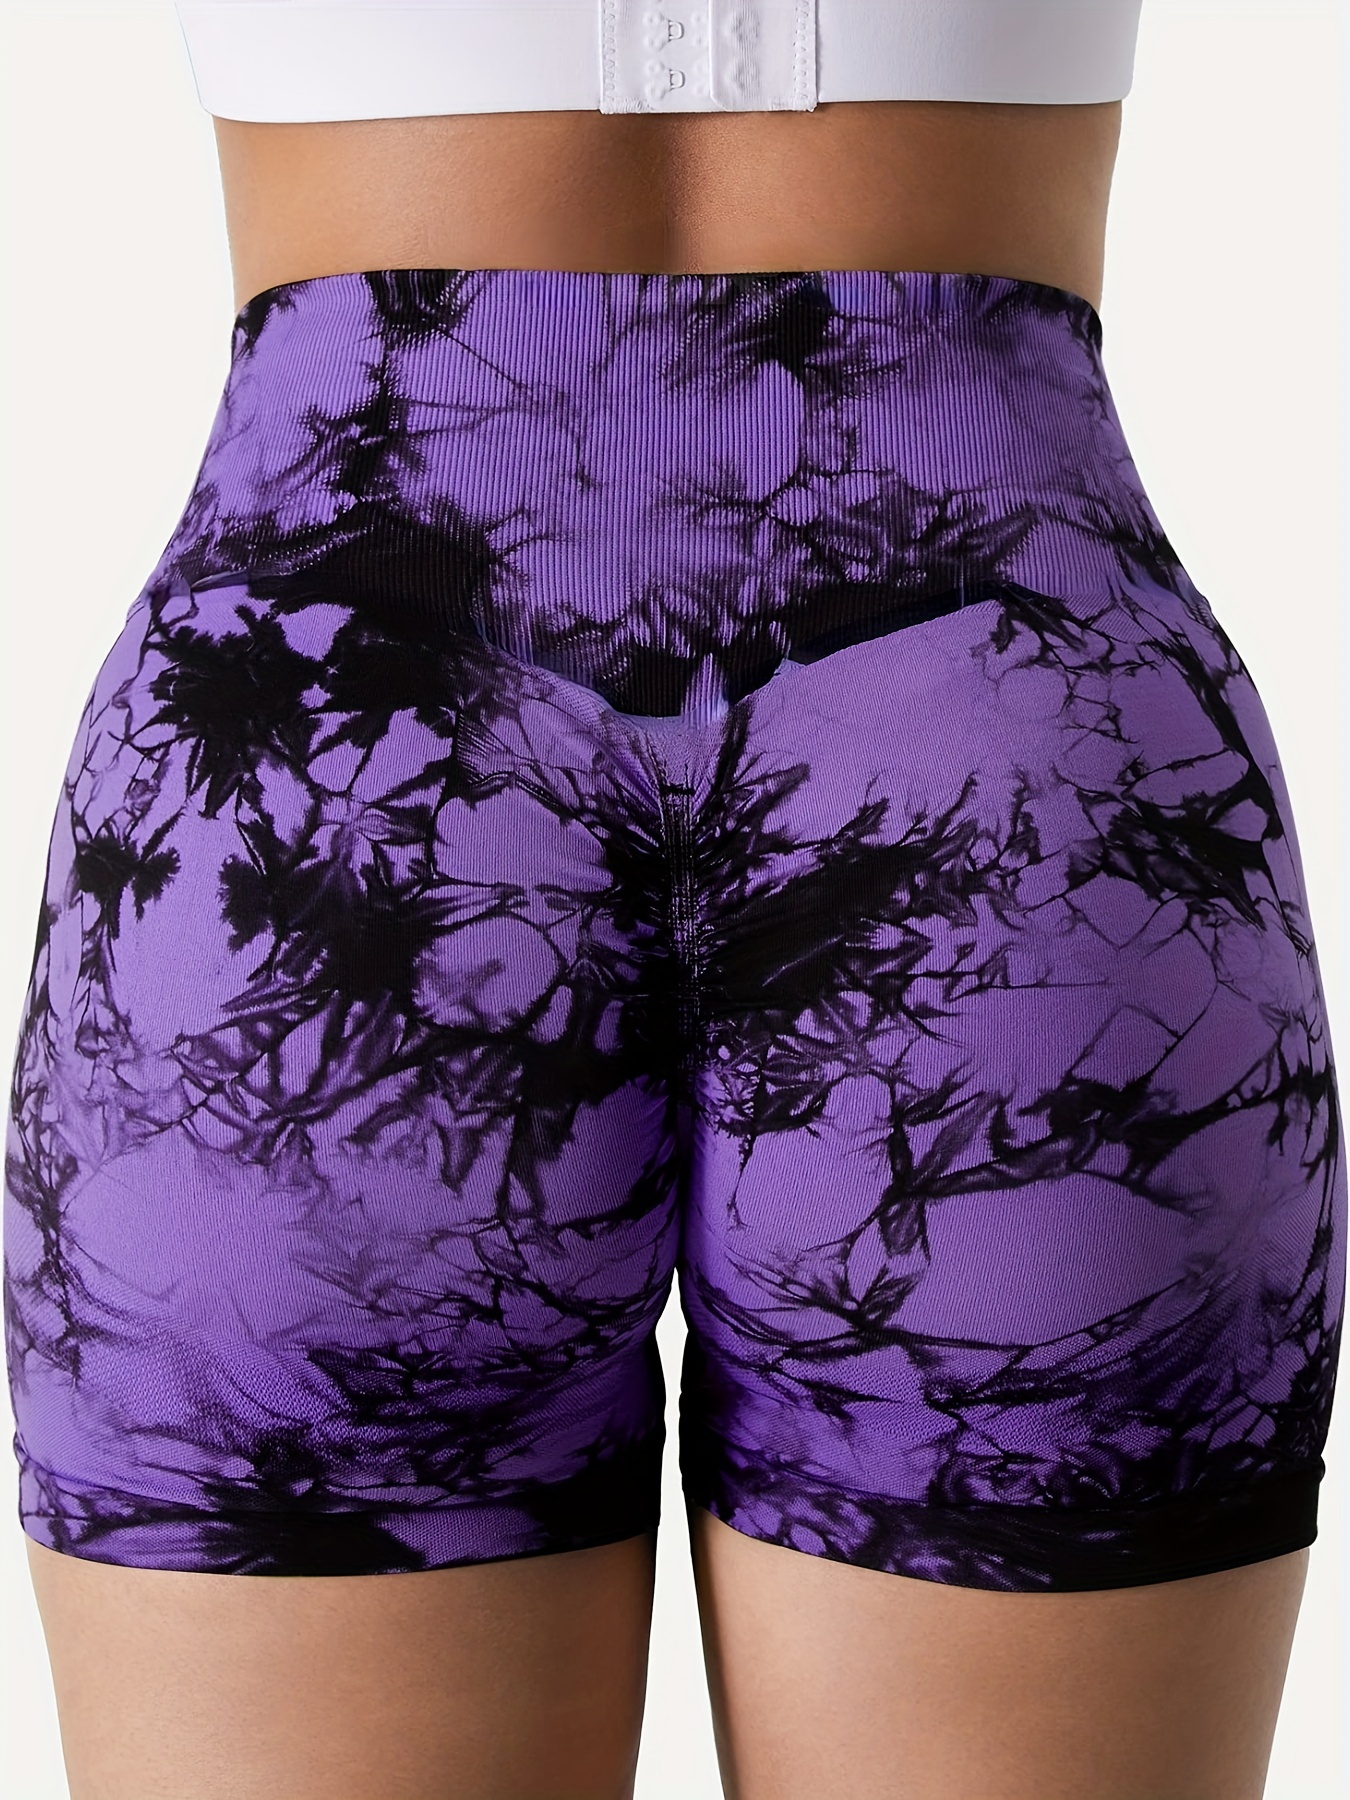 WHOUARE High Waisted Pocket Tie Dye Yoga Shorts, 4 Pack